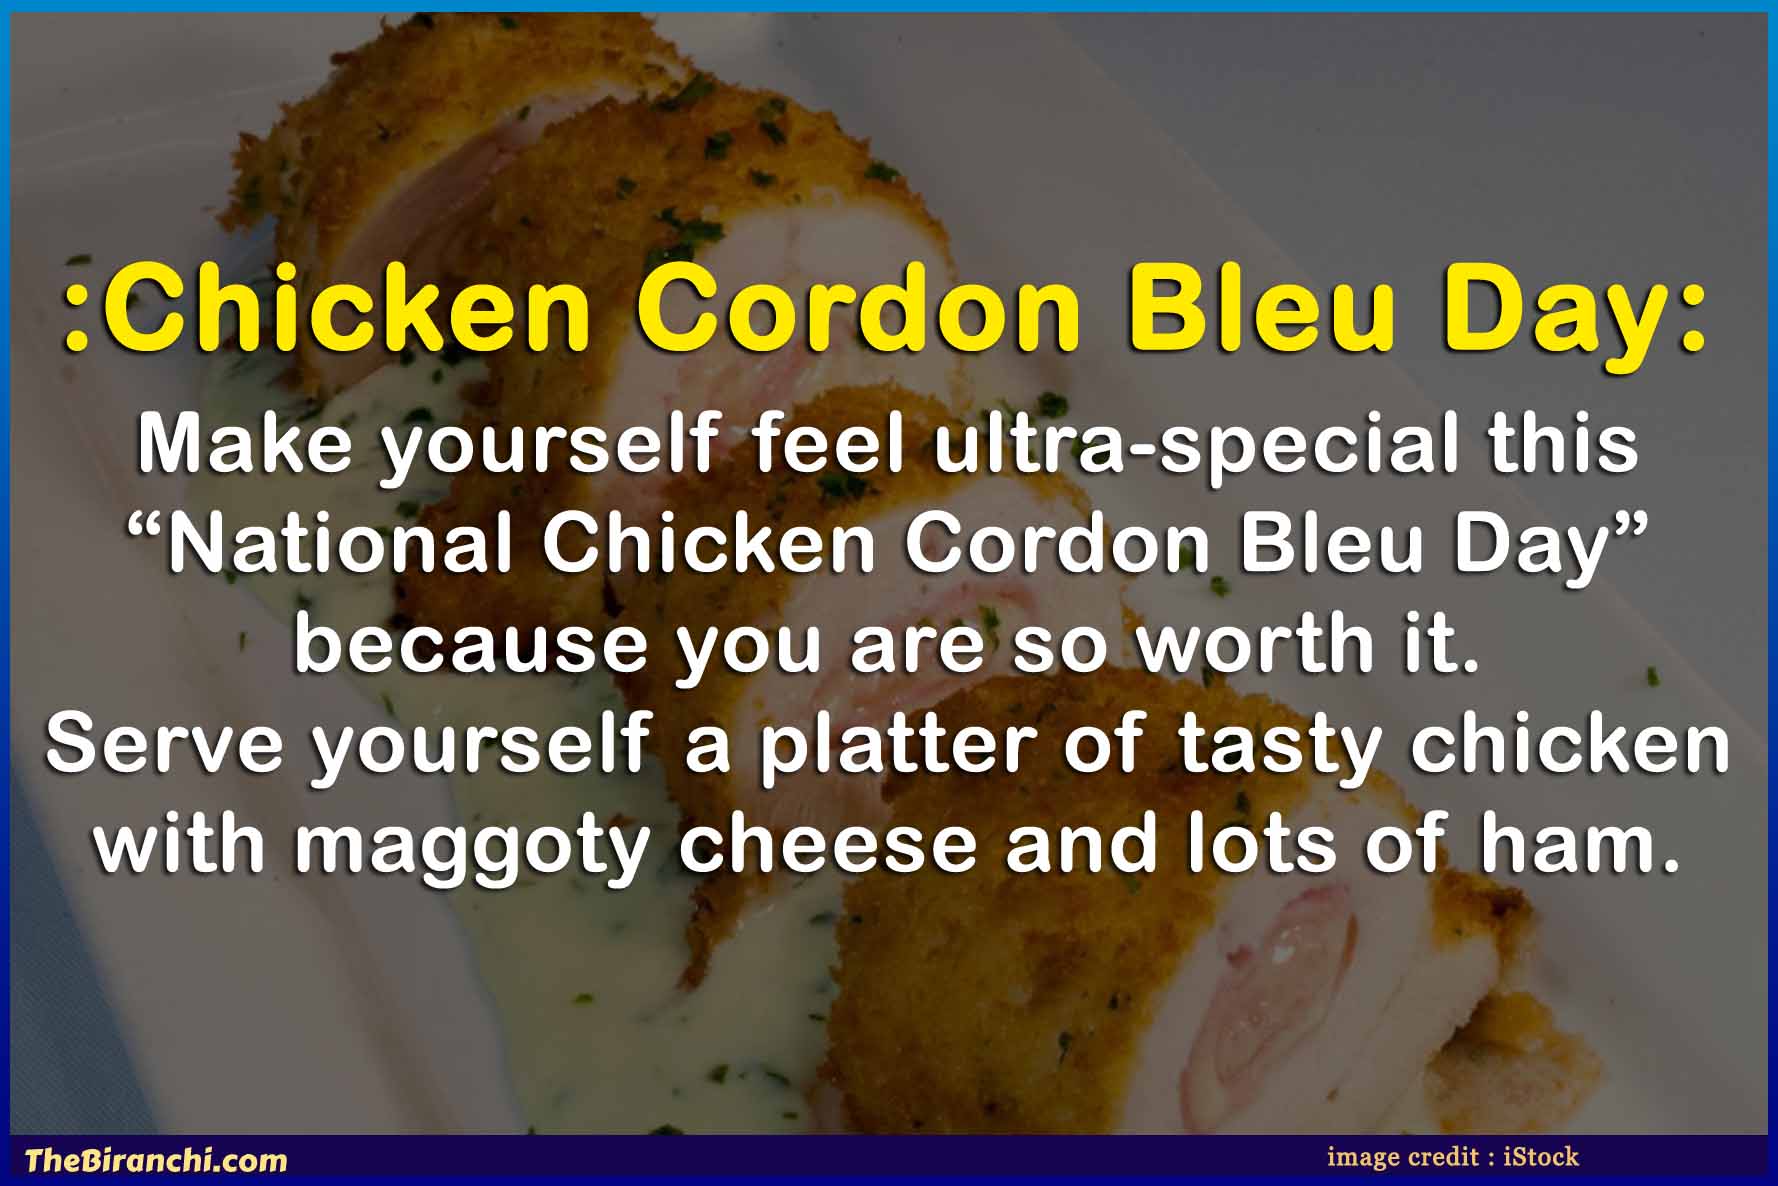 Make-yourself-feel-ultra-special-this-National-Chicken-Cordon-Bleu-Day-Messages